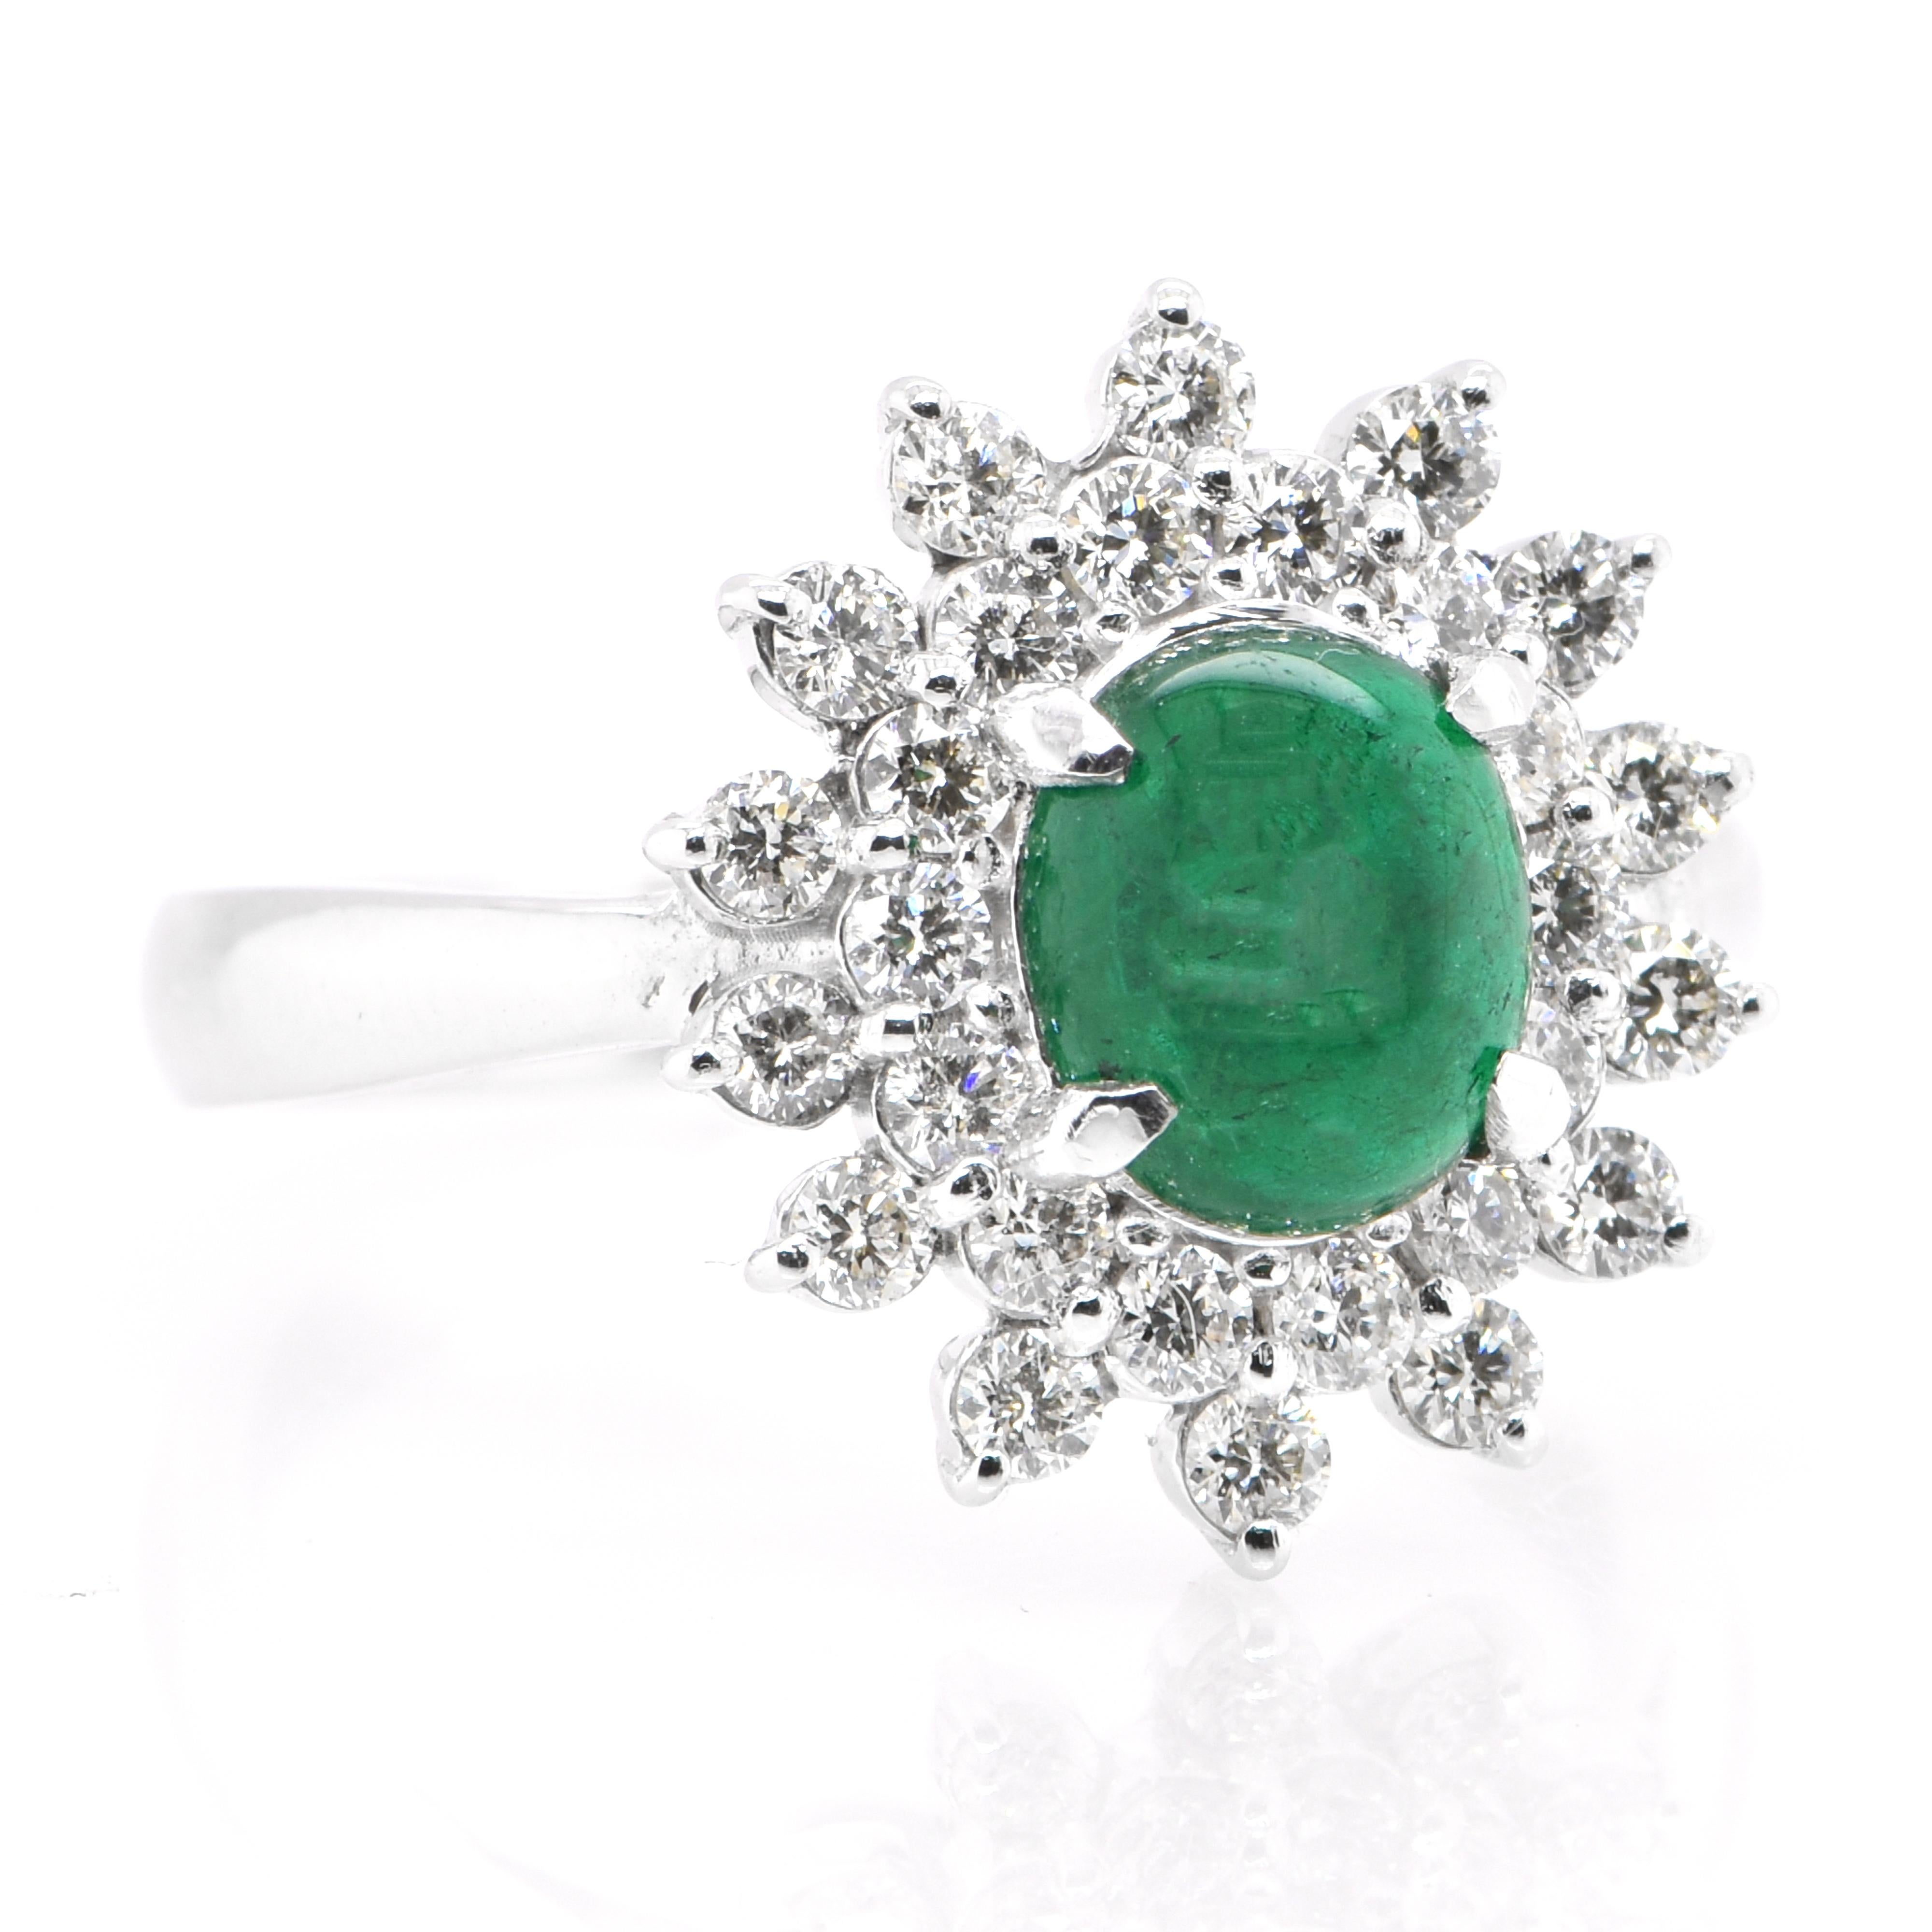 Modern 1.17 Carat Natural Emerald Cabochon and Diamond Ring Set in Platinum For Sale